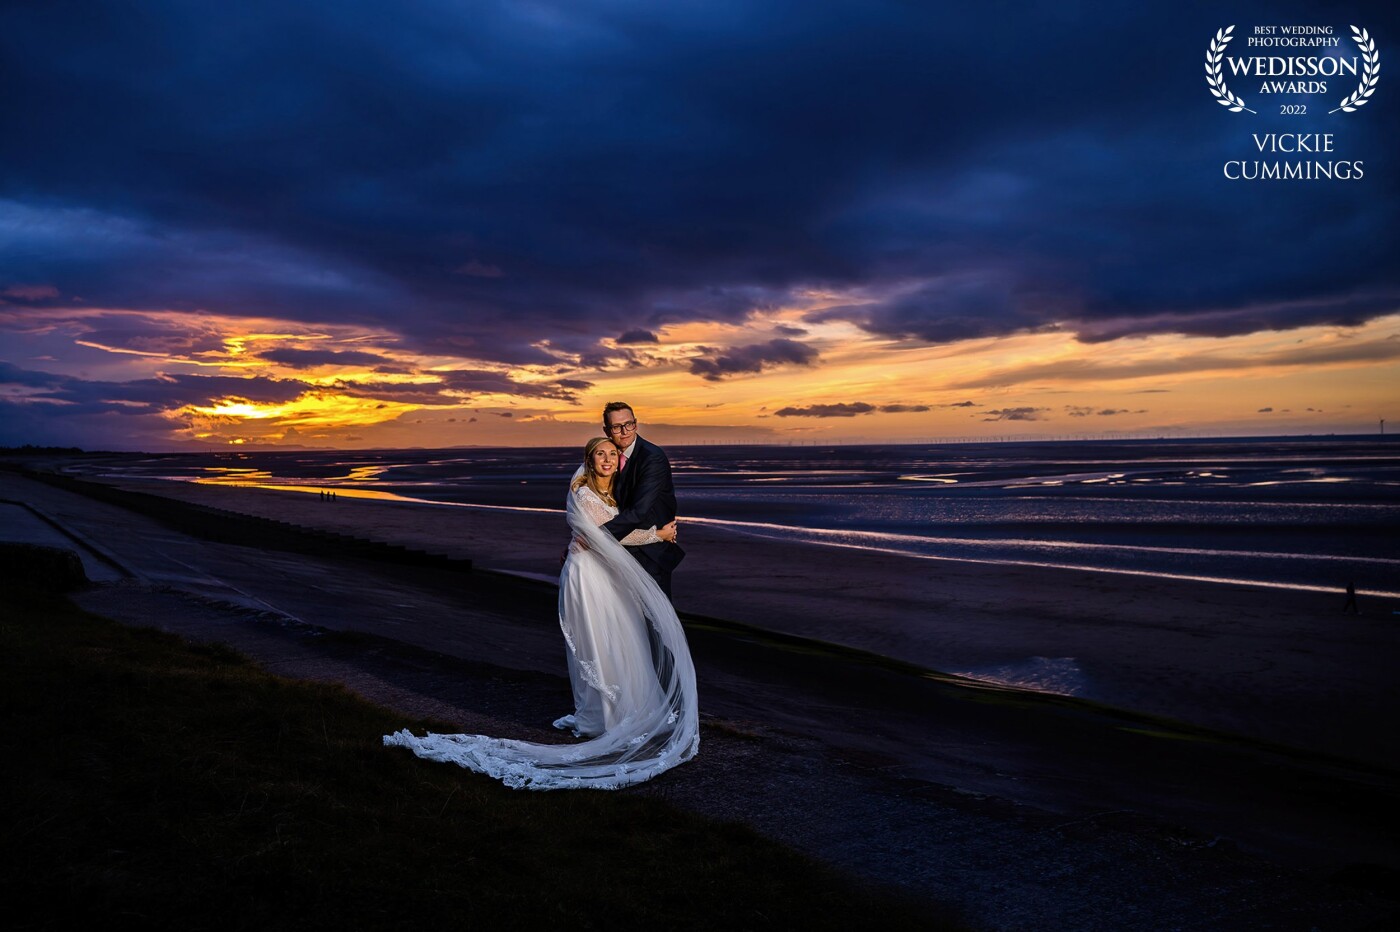 This Photograph was taken looking over The wirral peninsula at a Leasowe Castle wedding. It was such a still evening and we were blessed with a lovely sunset. I will always love photographing couples at Sunset.